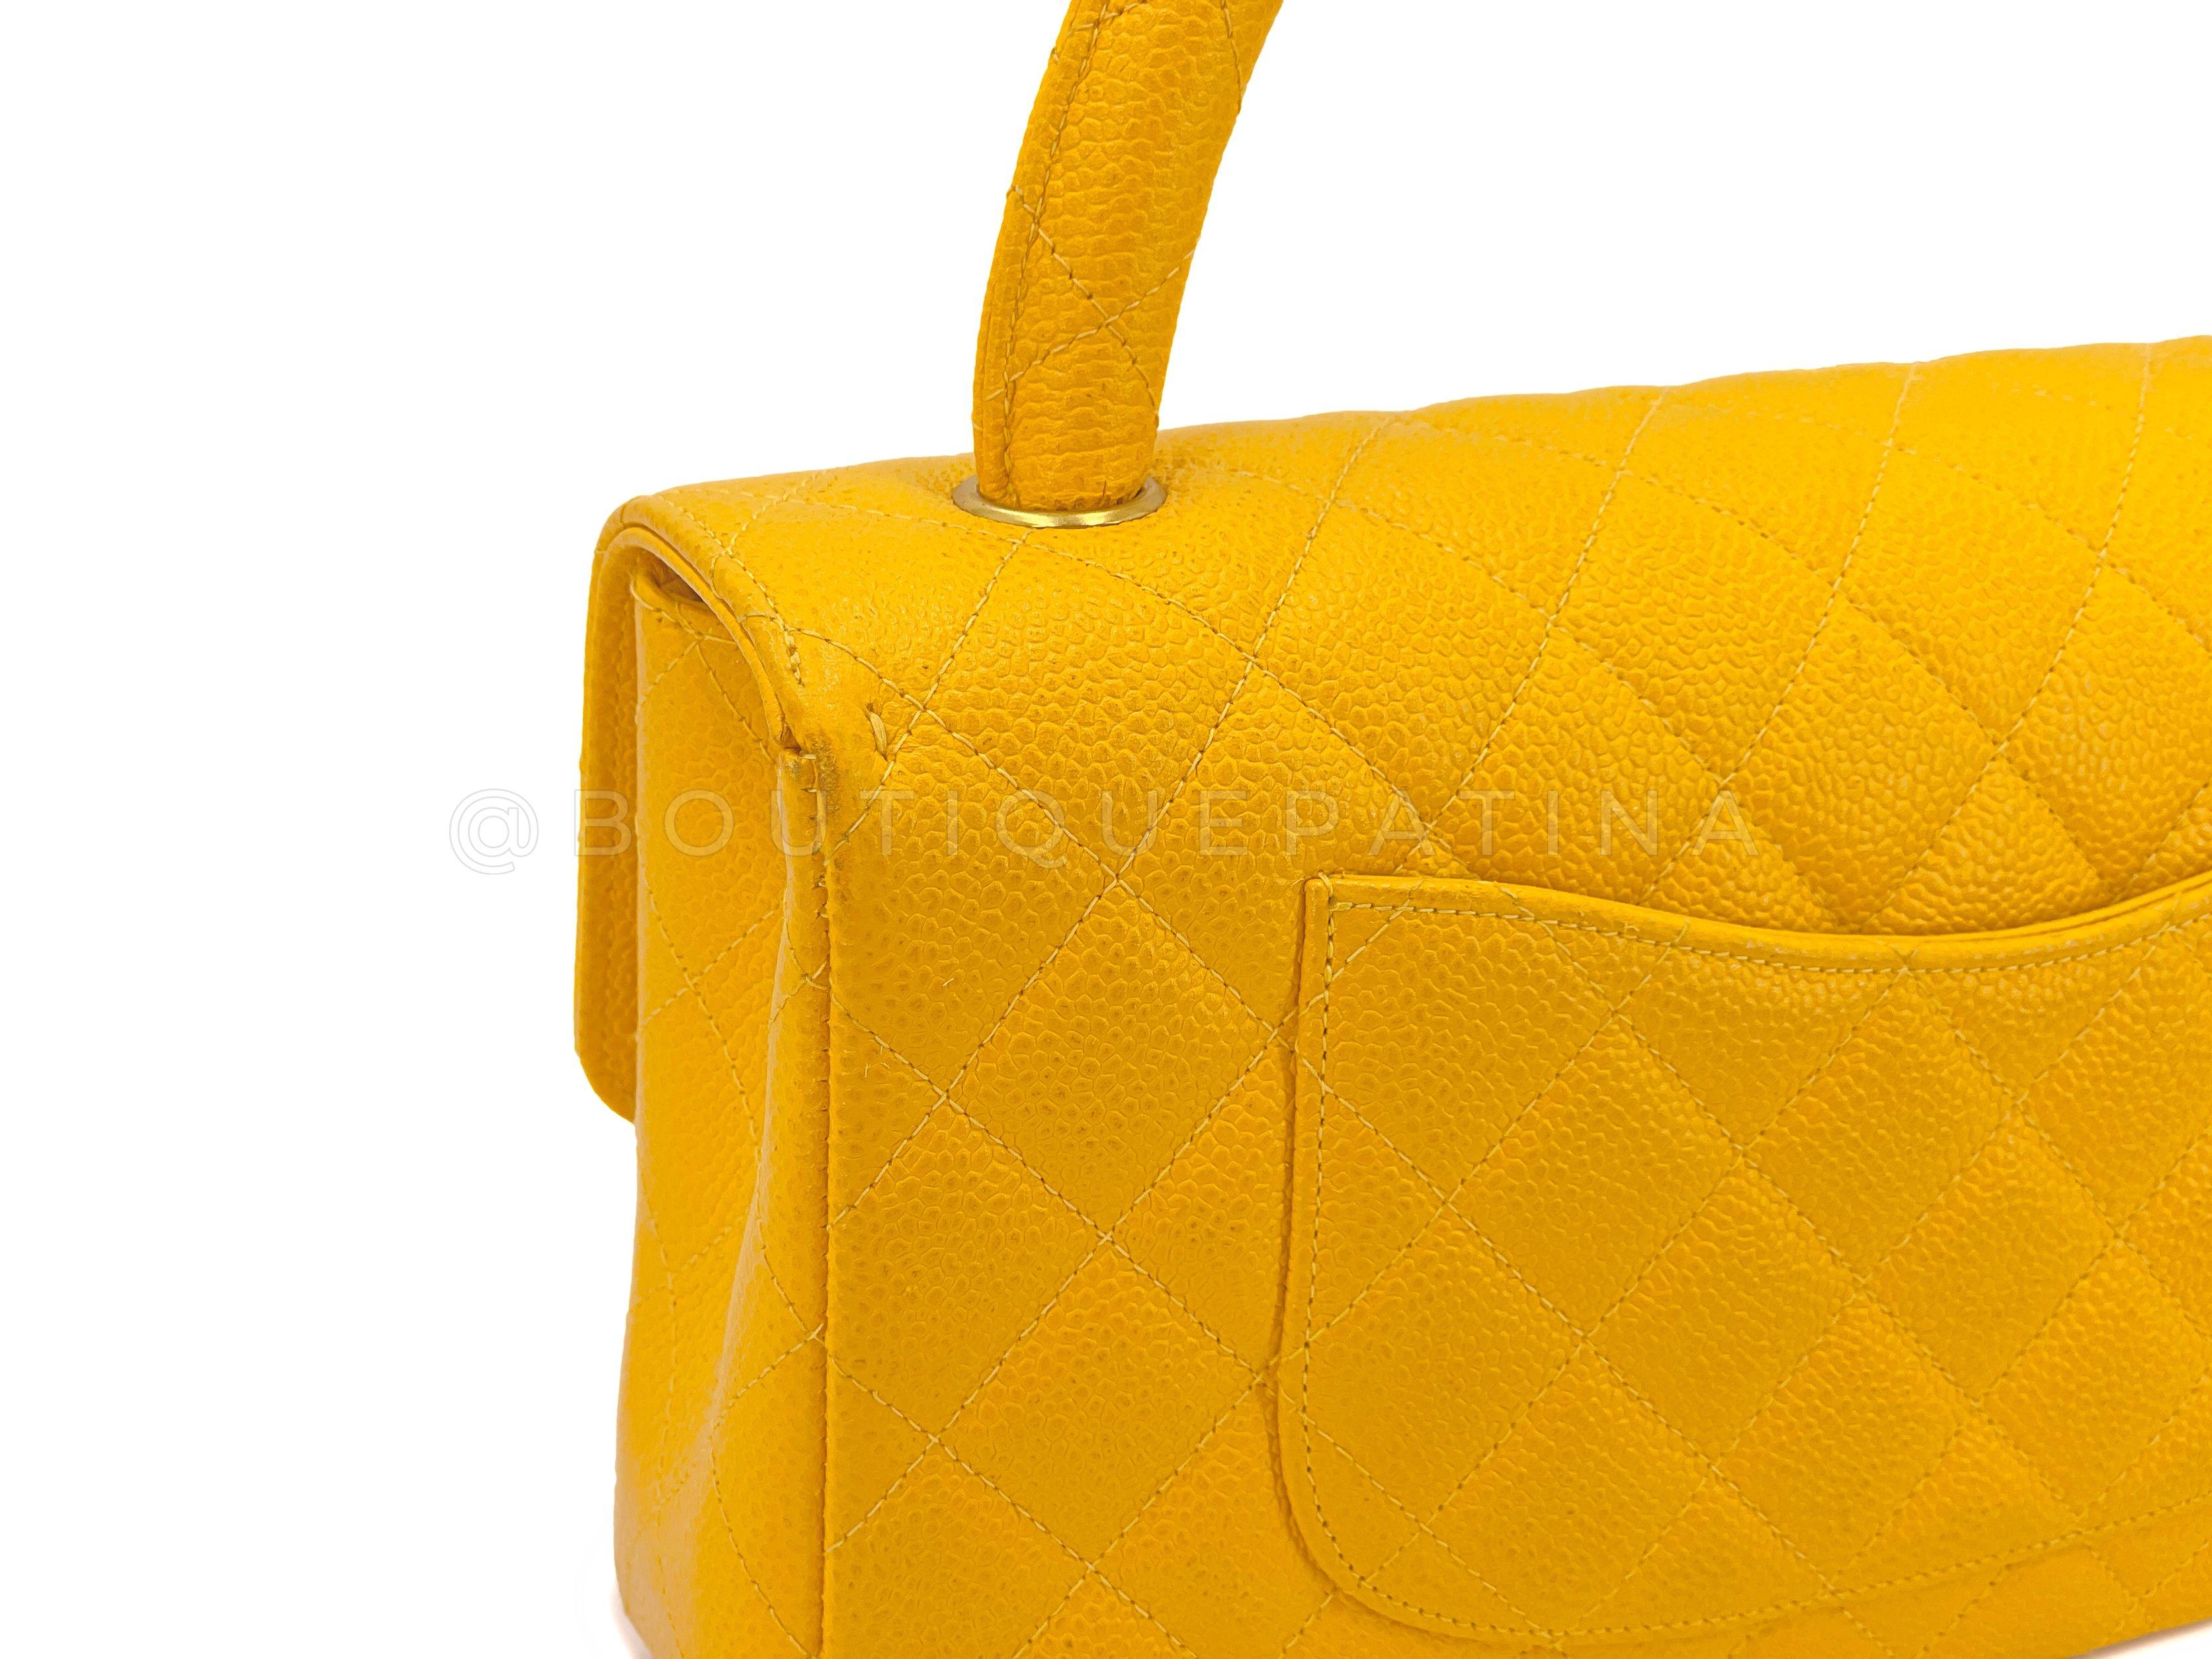 Chanel 1997 Vintage Canary Yellow Caviar Kelly Flap Parent Bag 24k GHW 66771 For Sale 2